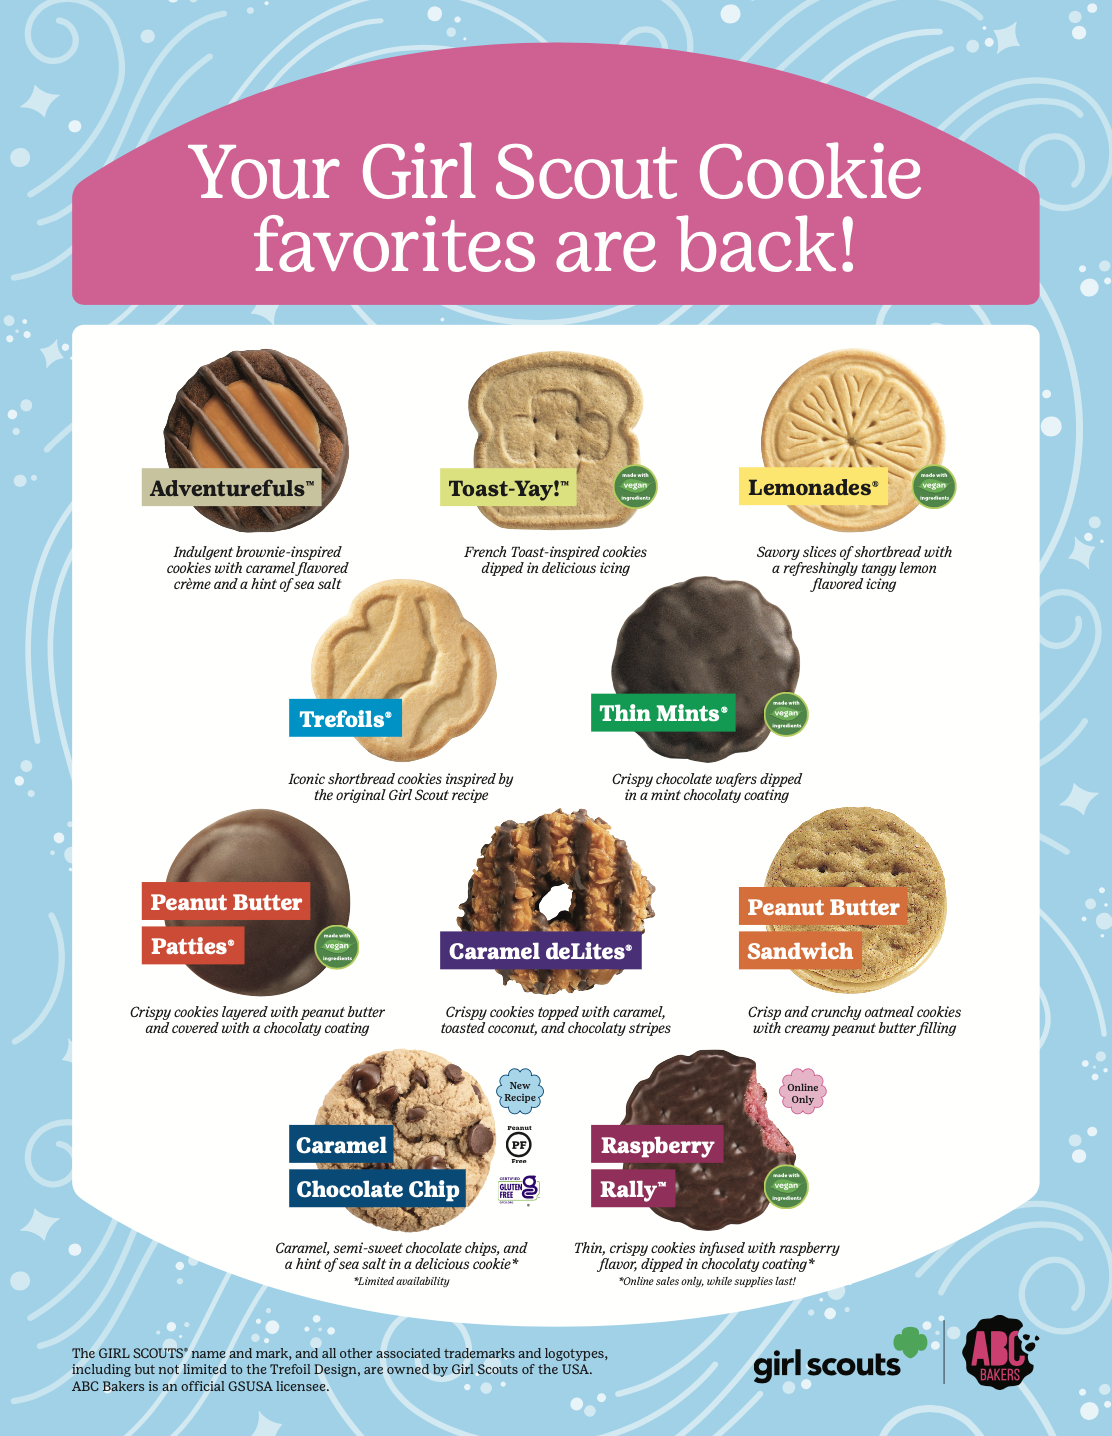 About Girl Scout Cookies